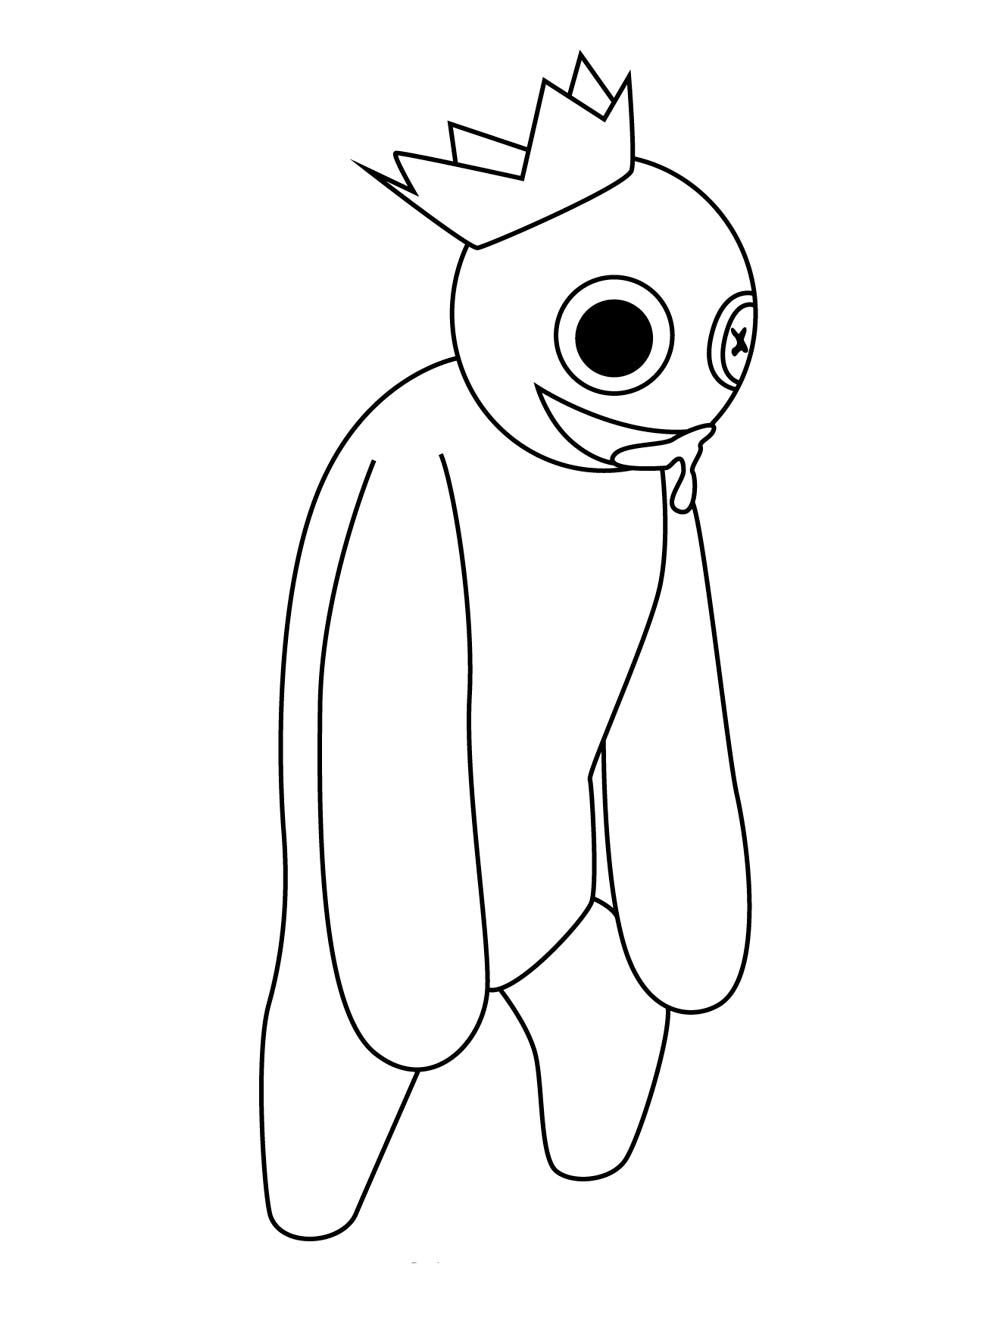 Blue Rainbow Friends Coloring Page - Coloring Home